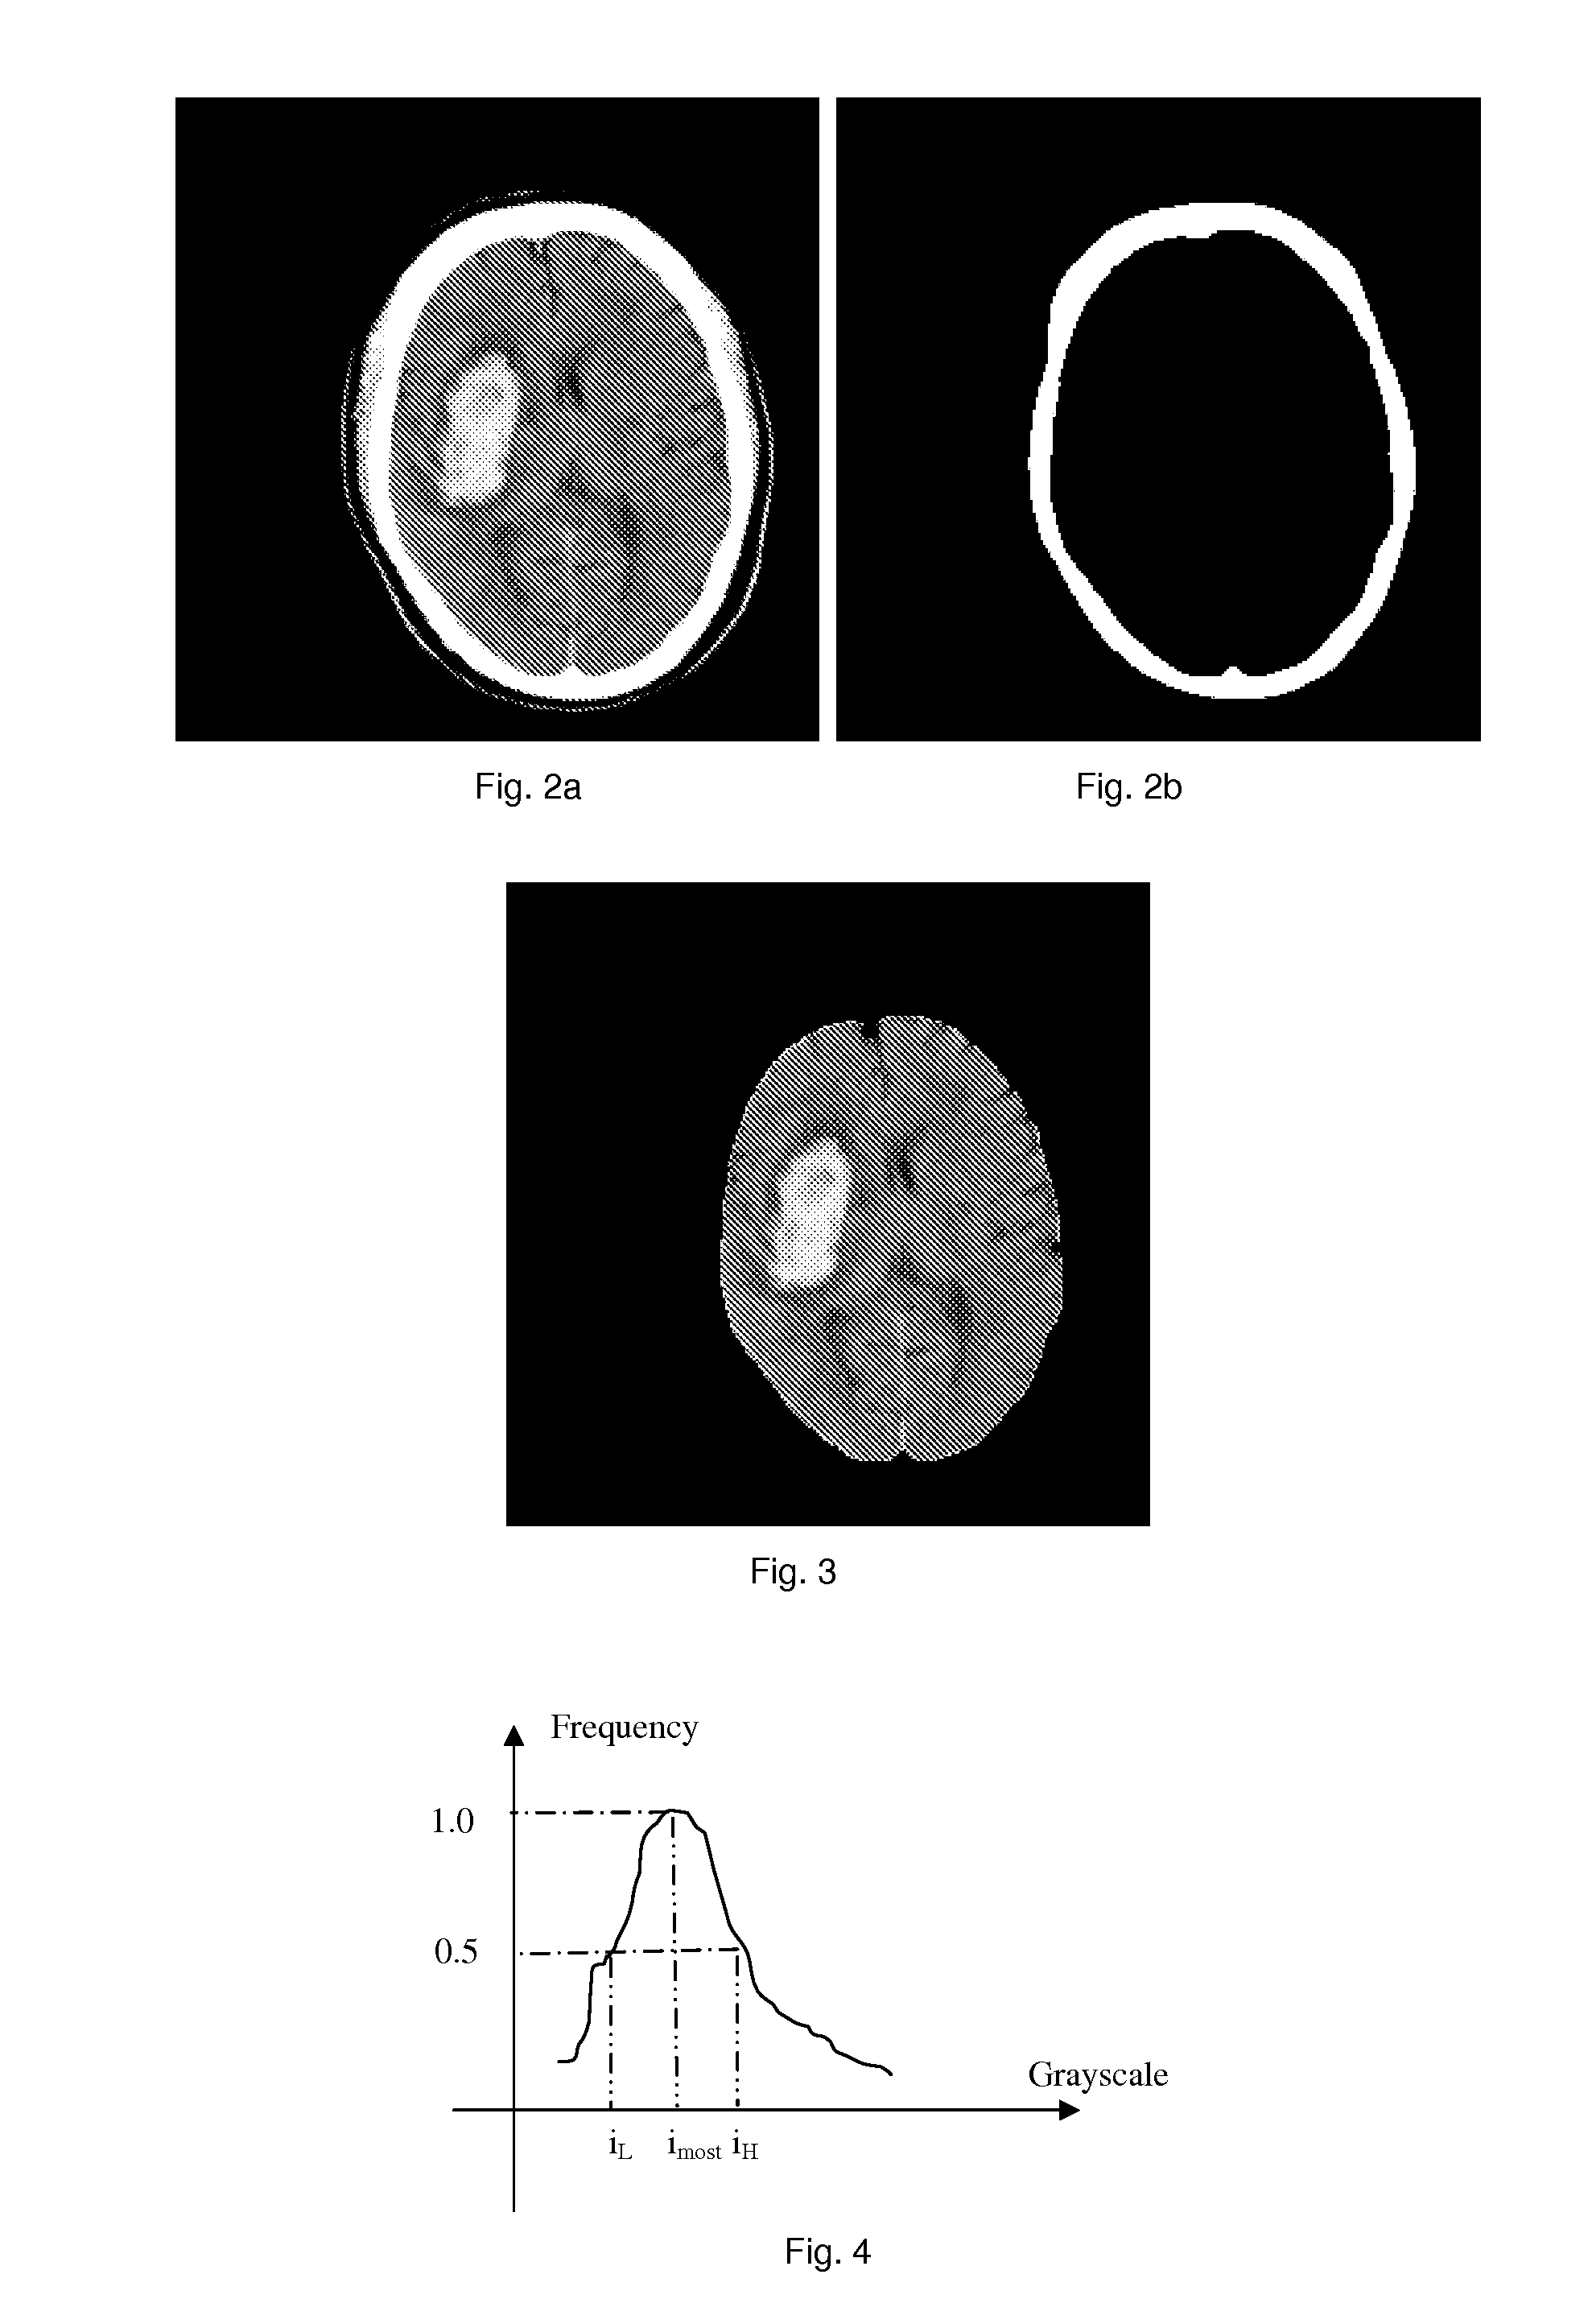 Method and device for detecting bright brain regions from computed tomography images